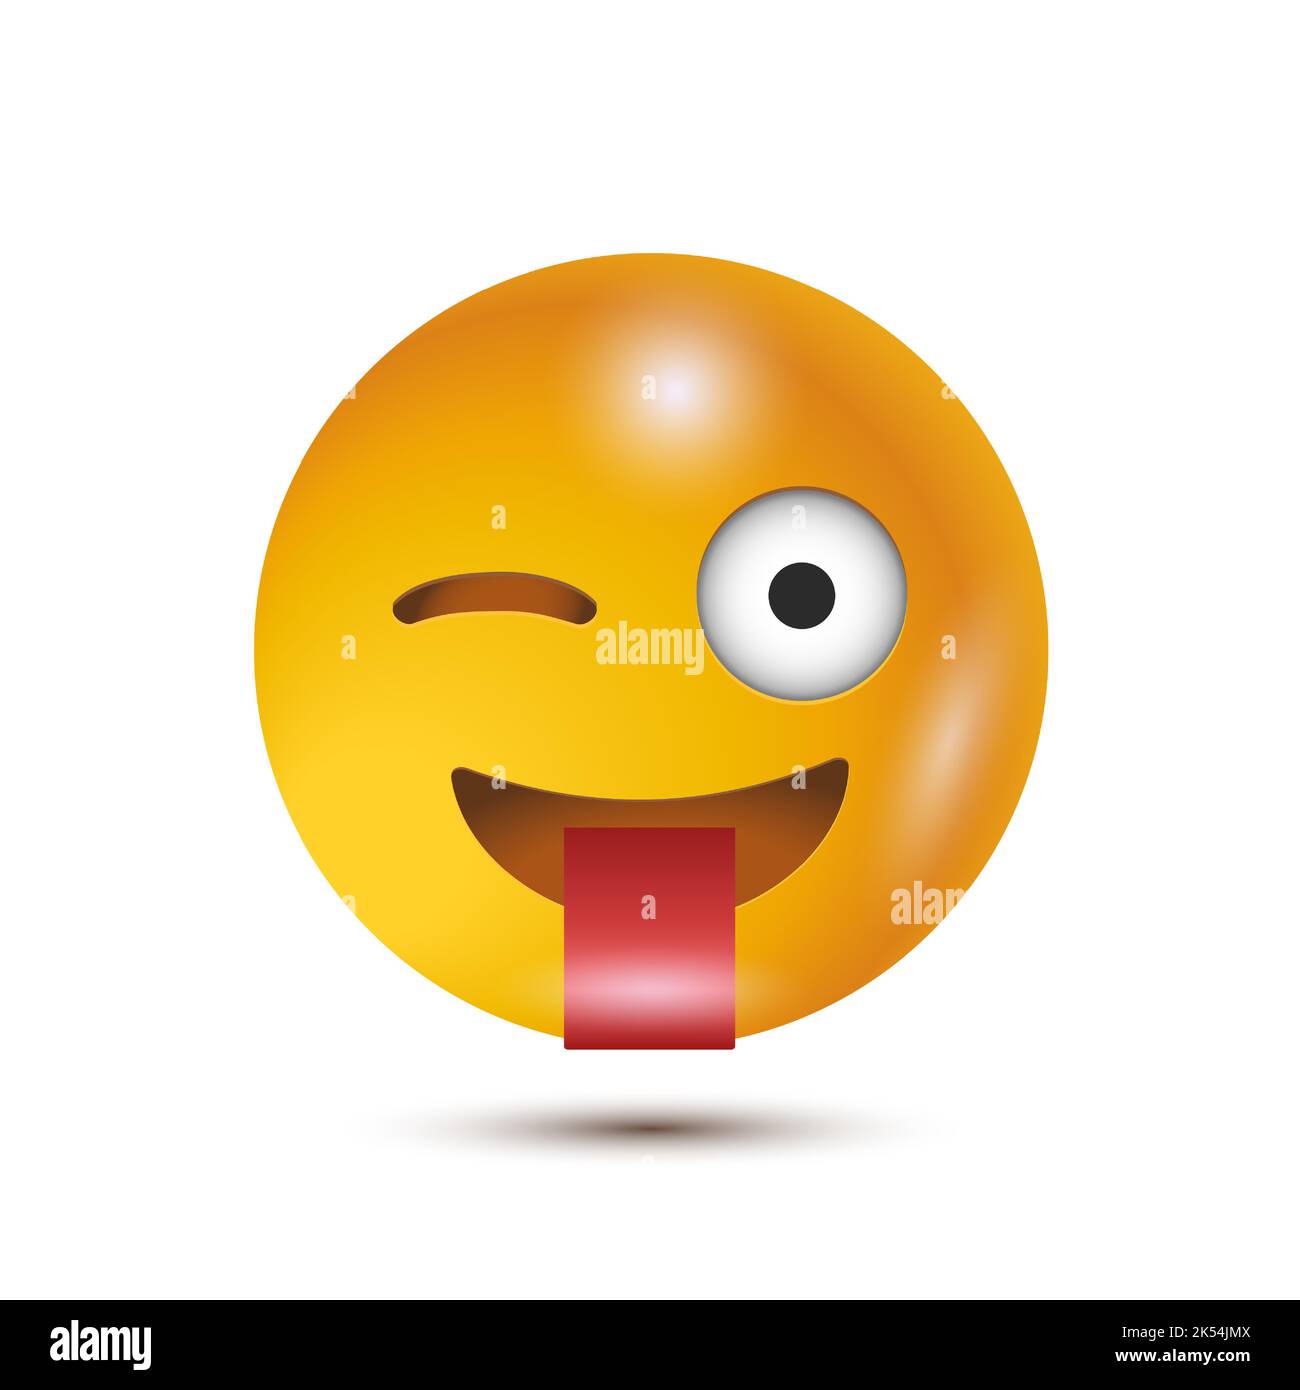 Crazy, Stuck out tongue winking eye. funny yellow emoticon. realistic emoticon. 3D emoticon for web. for emoticon characters design collection. for Stock Vector